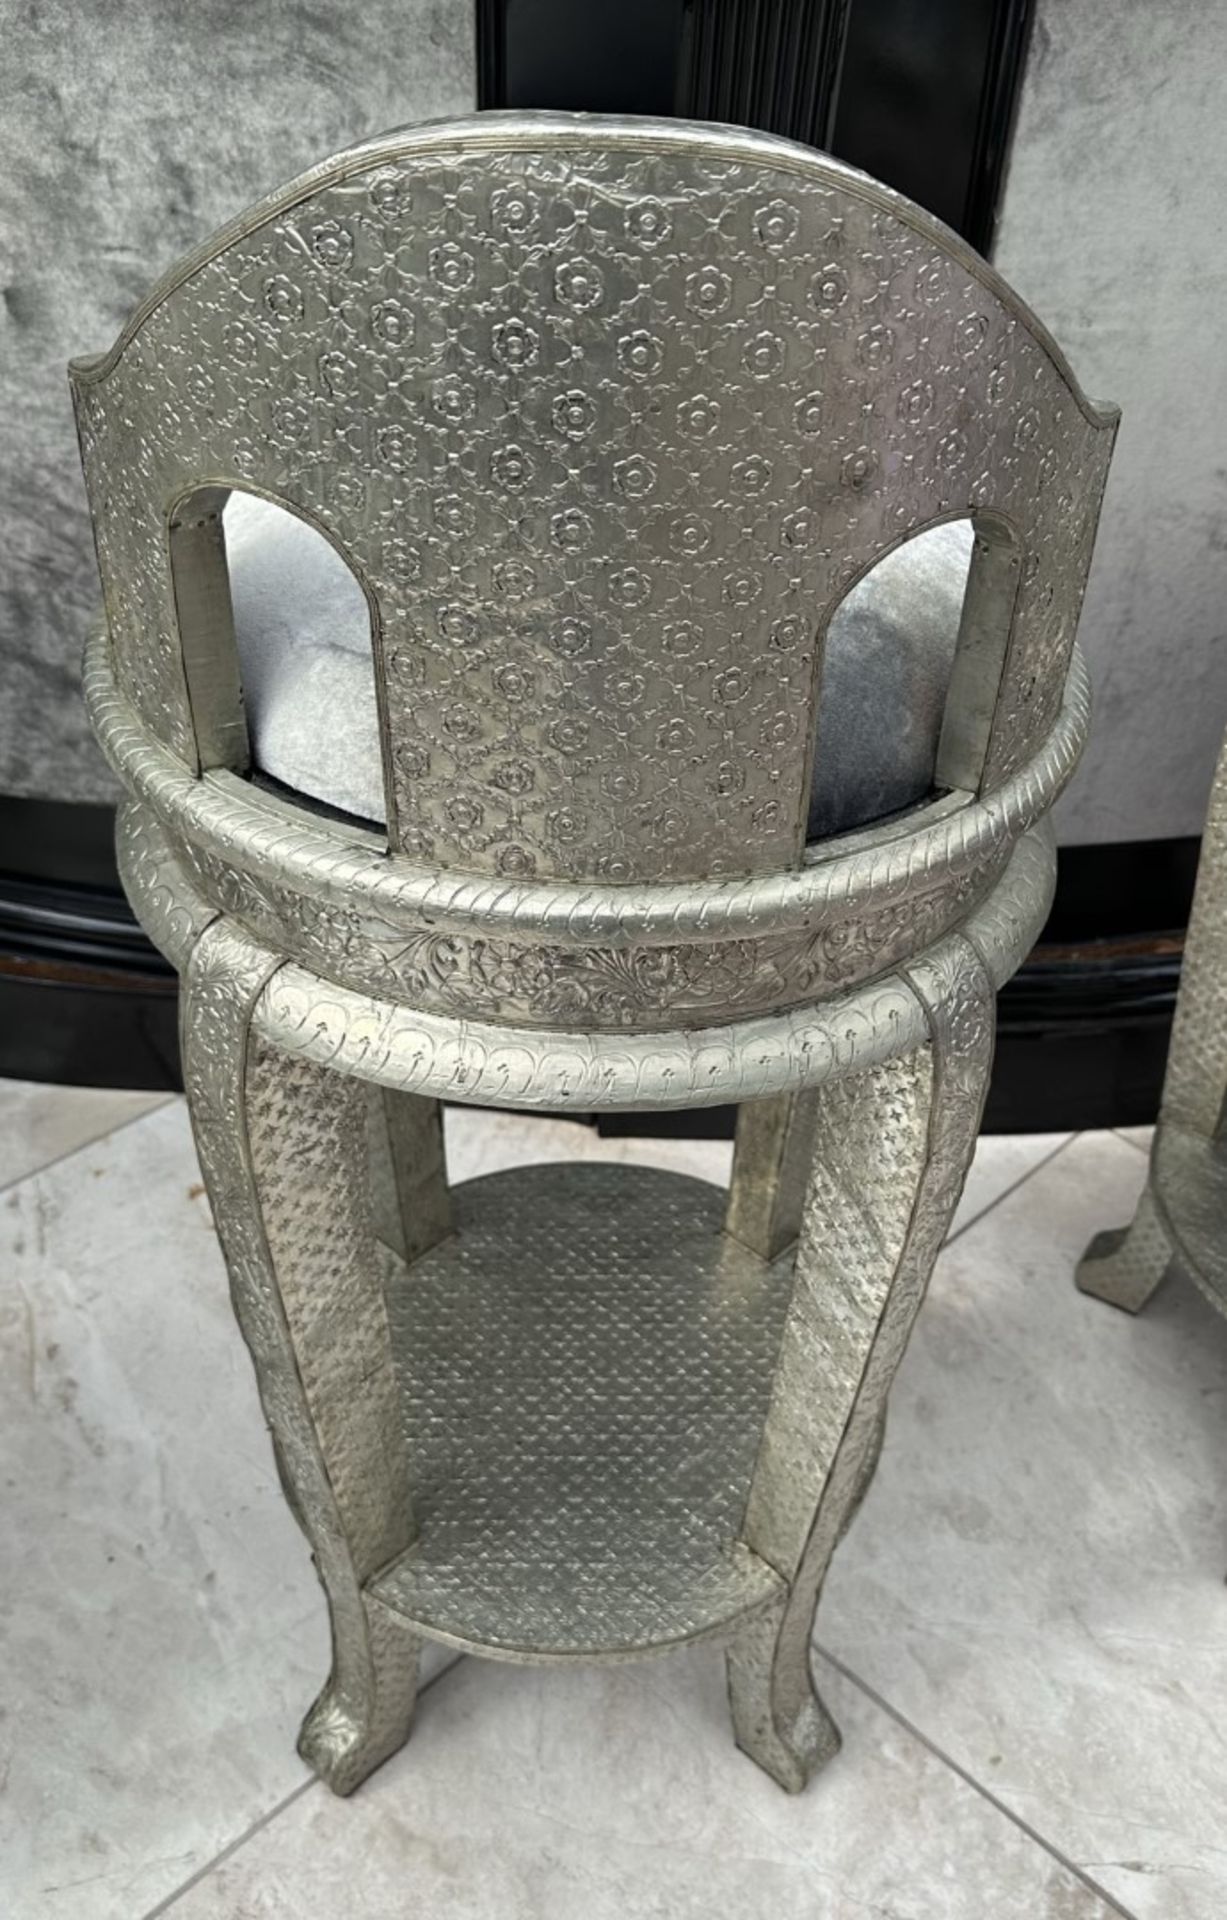 6 x Ornate Silver Tone Bar Stools With Grey Velvet Seat Pads - Image 13 of 16